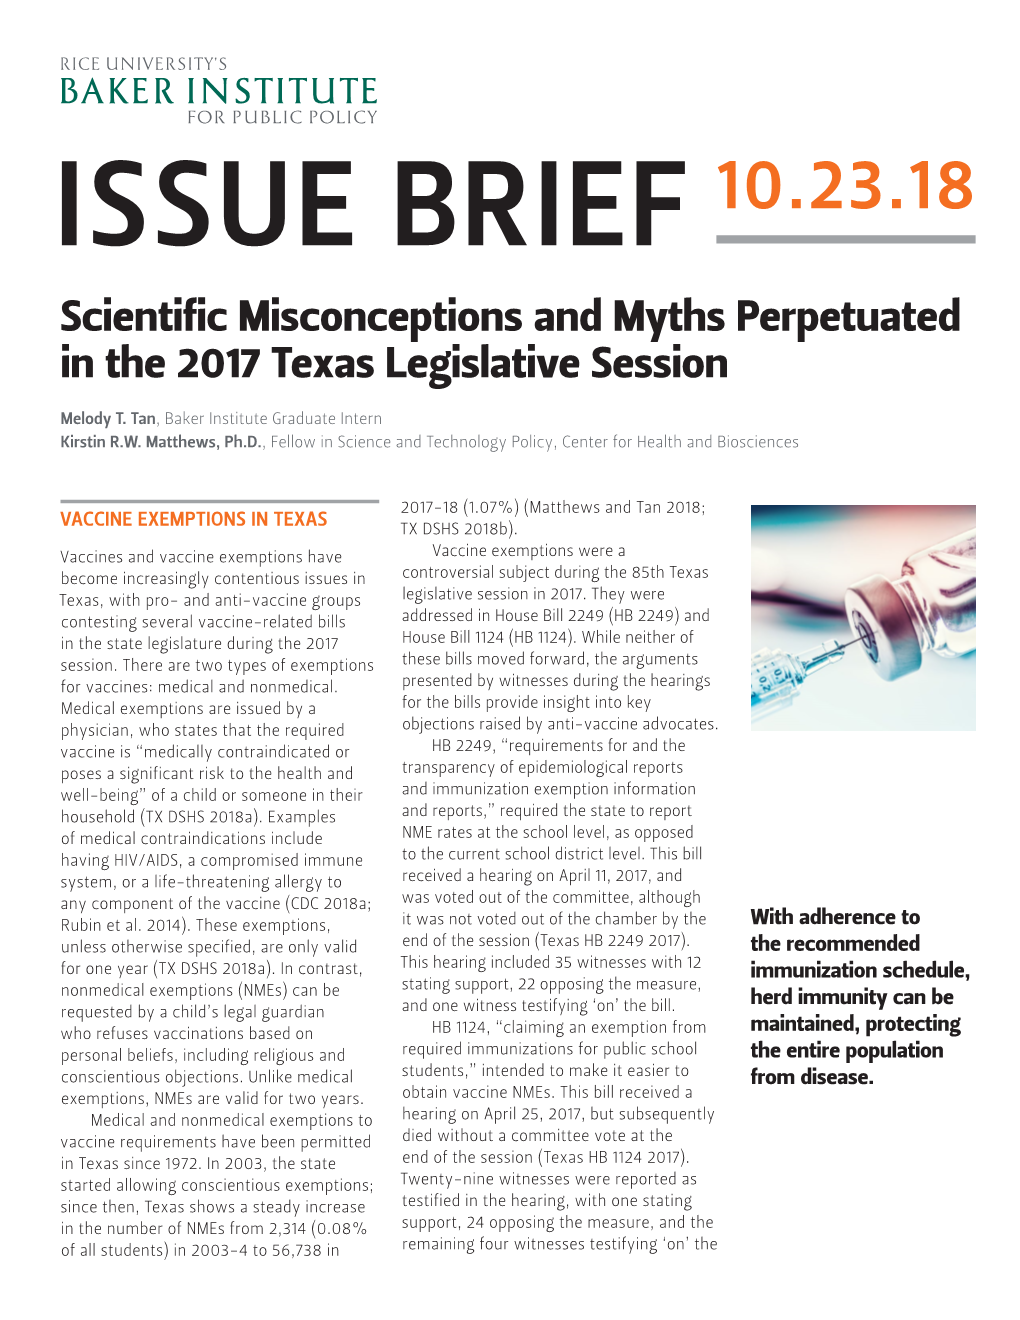 Scientific Misconceptions and Myths Perpetuated in the 2017 Texas Legislative Session